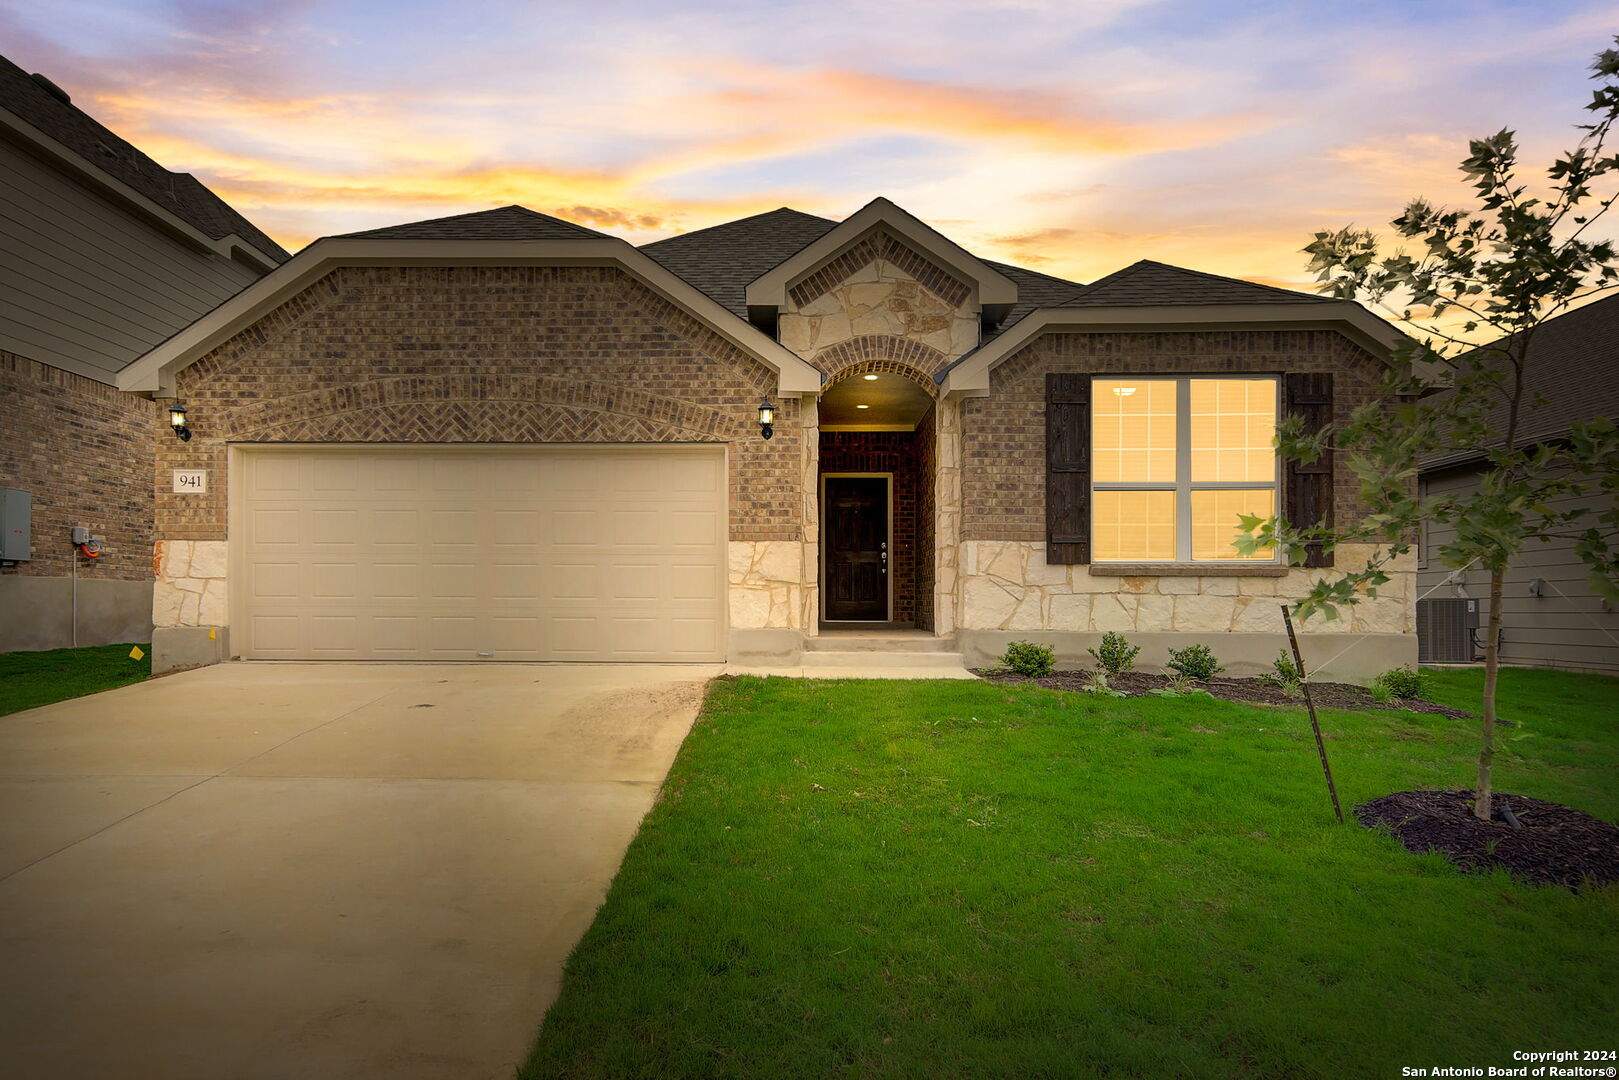 Photo of 941 Pasture Rose in New Braunfels, TX